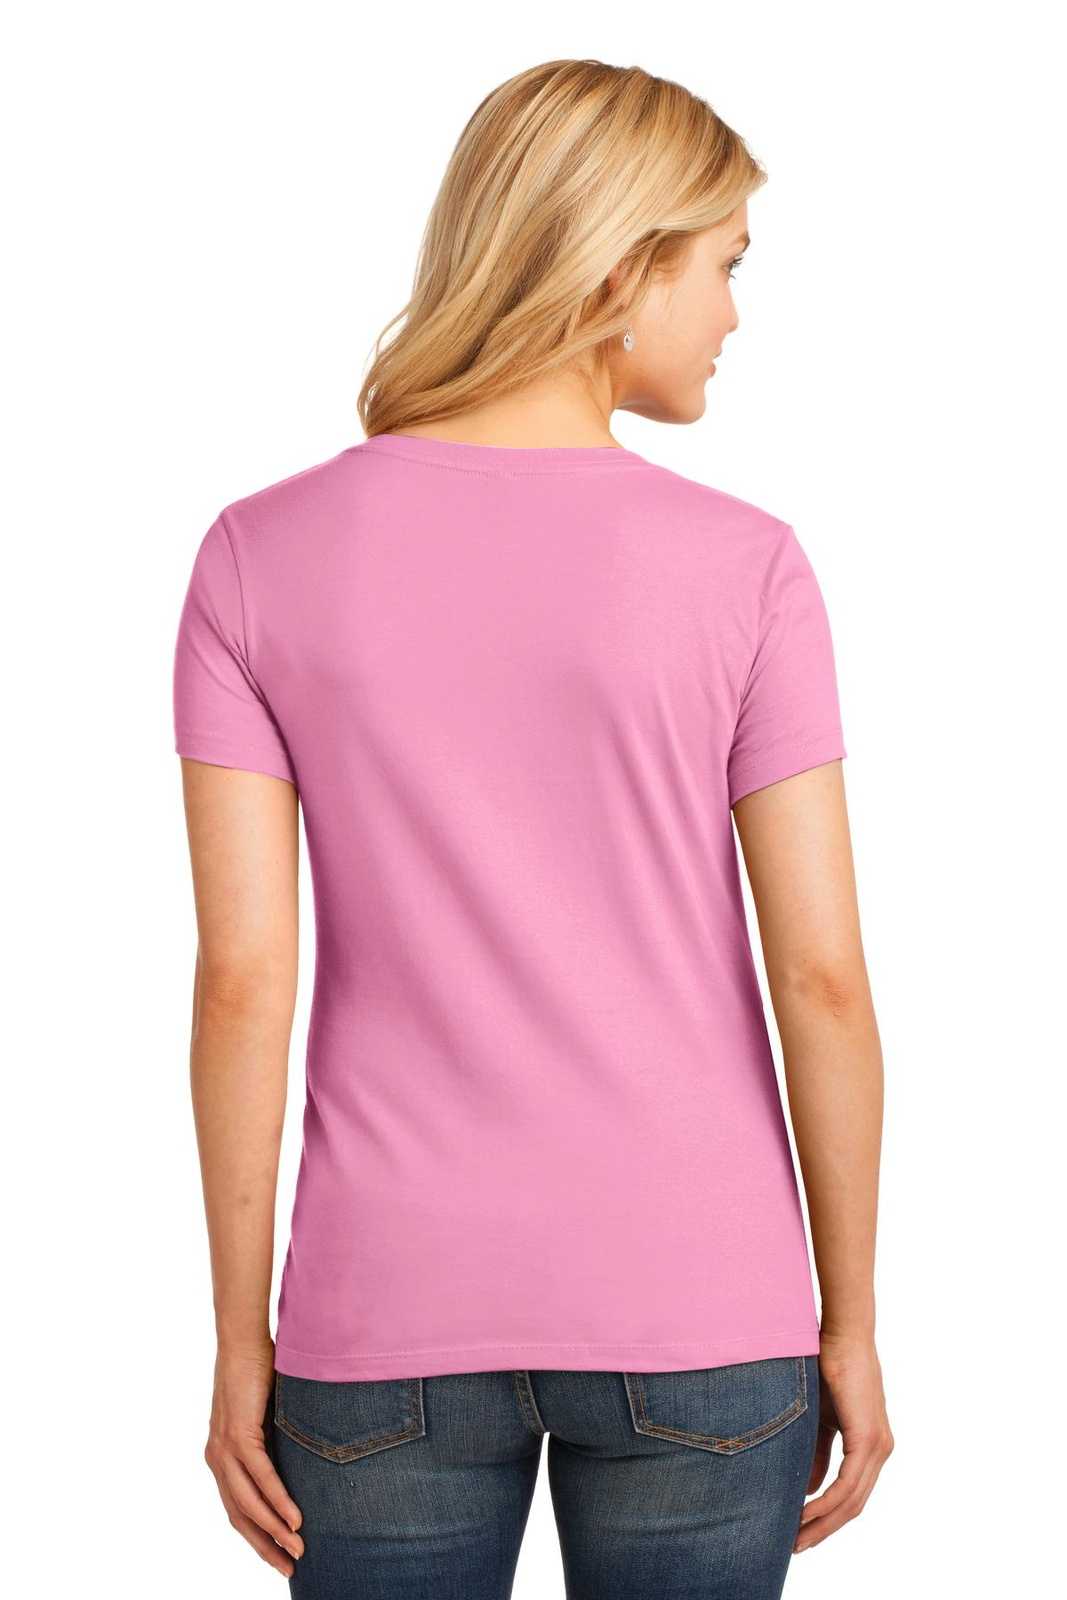 Port & Company LPC54V Ladies Core Cotton V-Neck Tee - Candy Pink - HIT a Double - 1